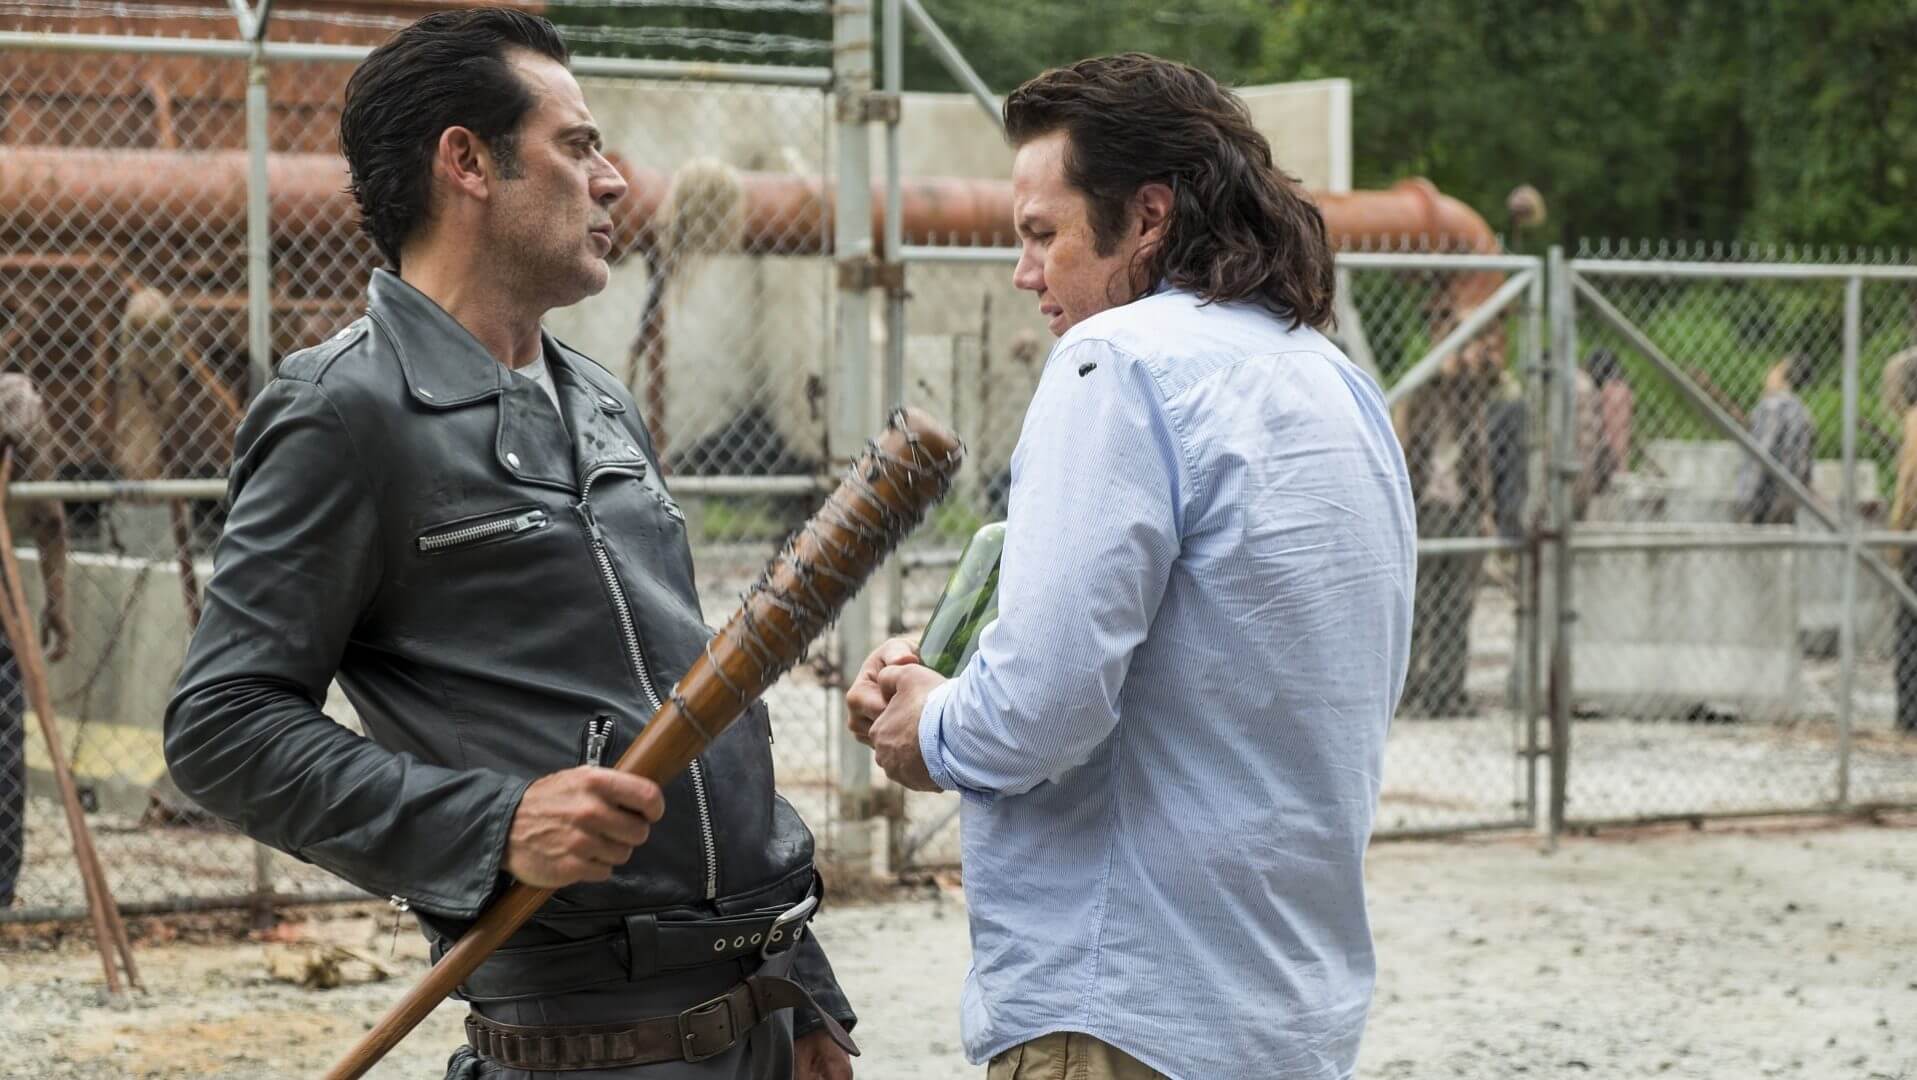 Negan with Lucille threatening Eugene on The Walking Dead